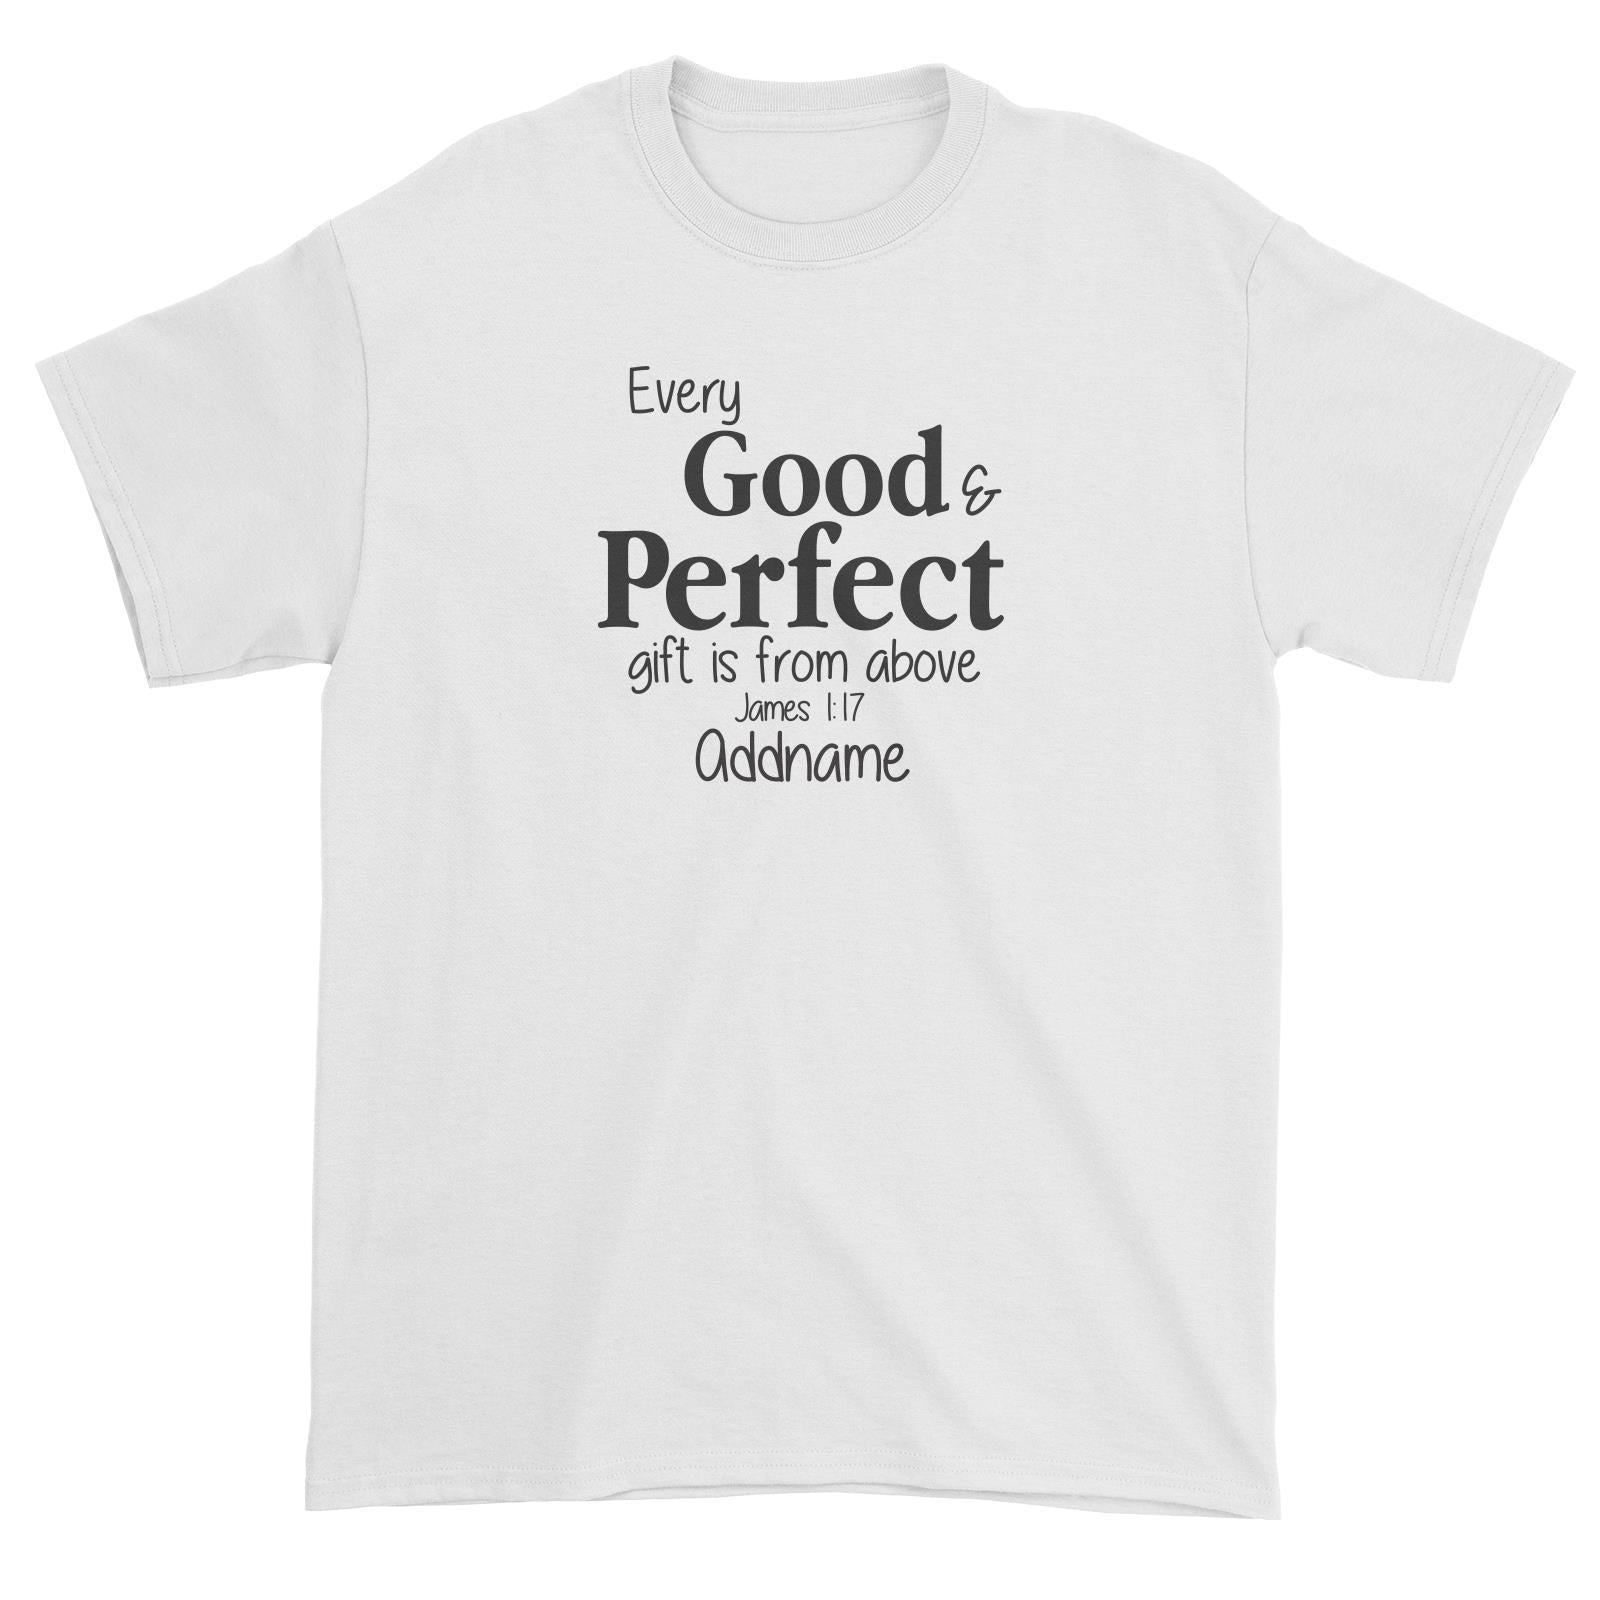 Christ Newborn Every Good and Perfect Gift is from Above James 1.17 Addname Unisex T-Shirt